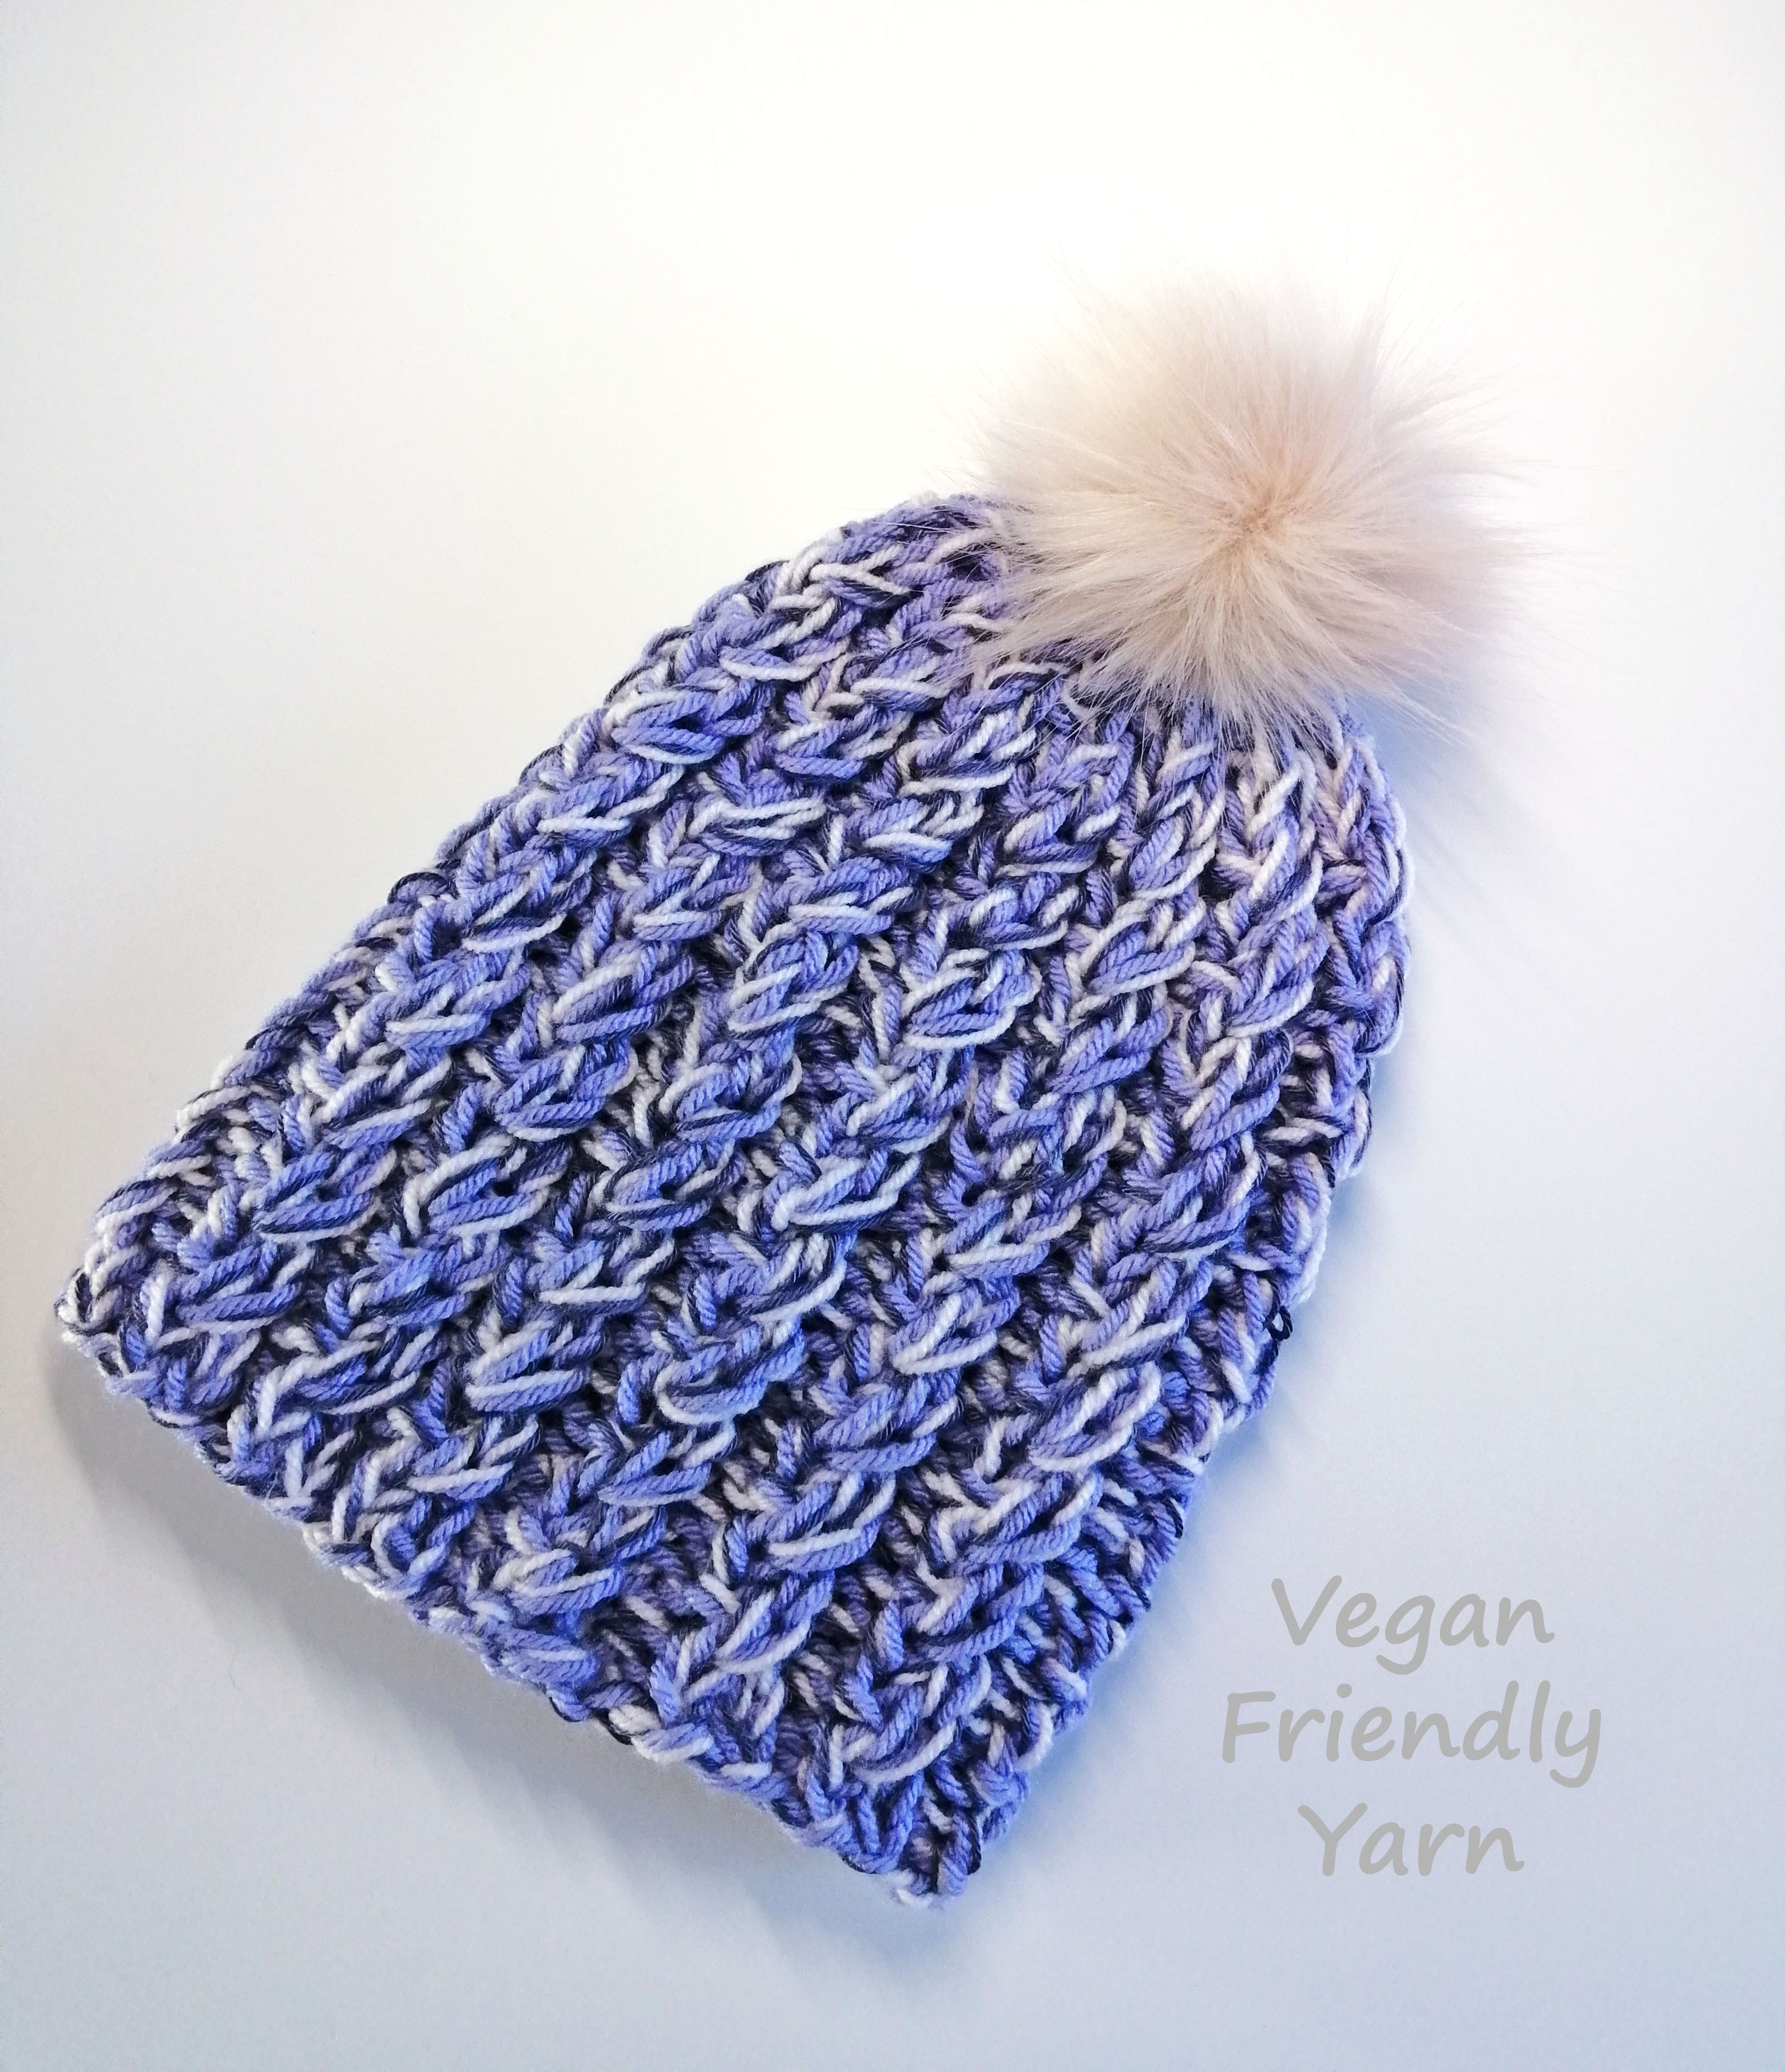 One-of-a-kind, Hand Knit Beanie / hat in Vegan Friendly acrylic and cotton yarns, with a faux fur pom. Lilac, lavender and pale pink.